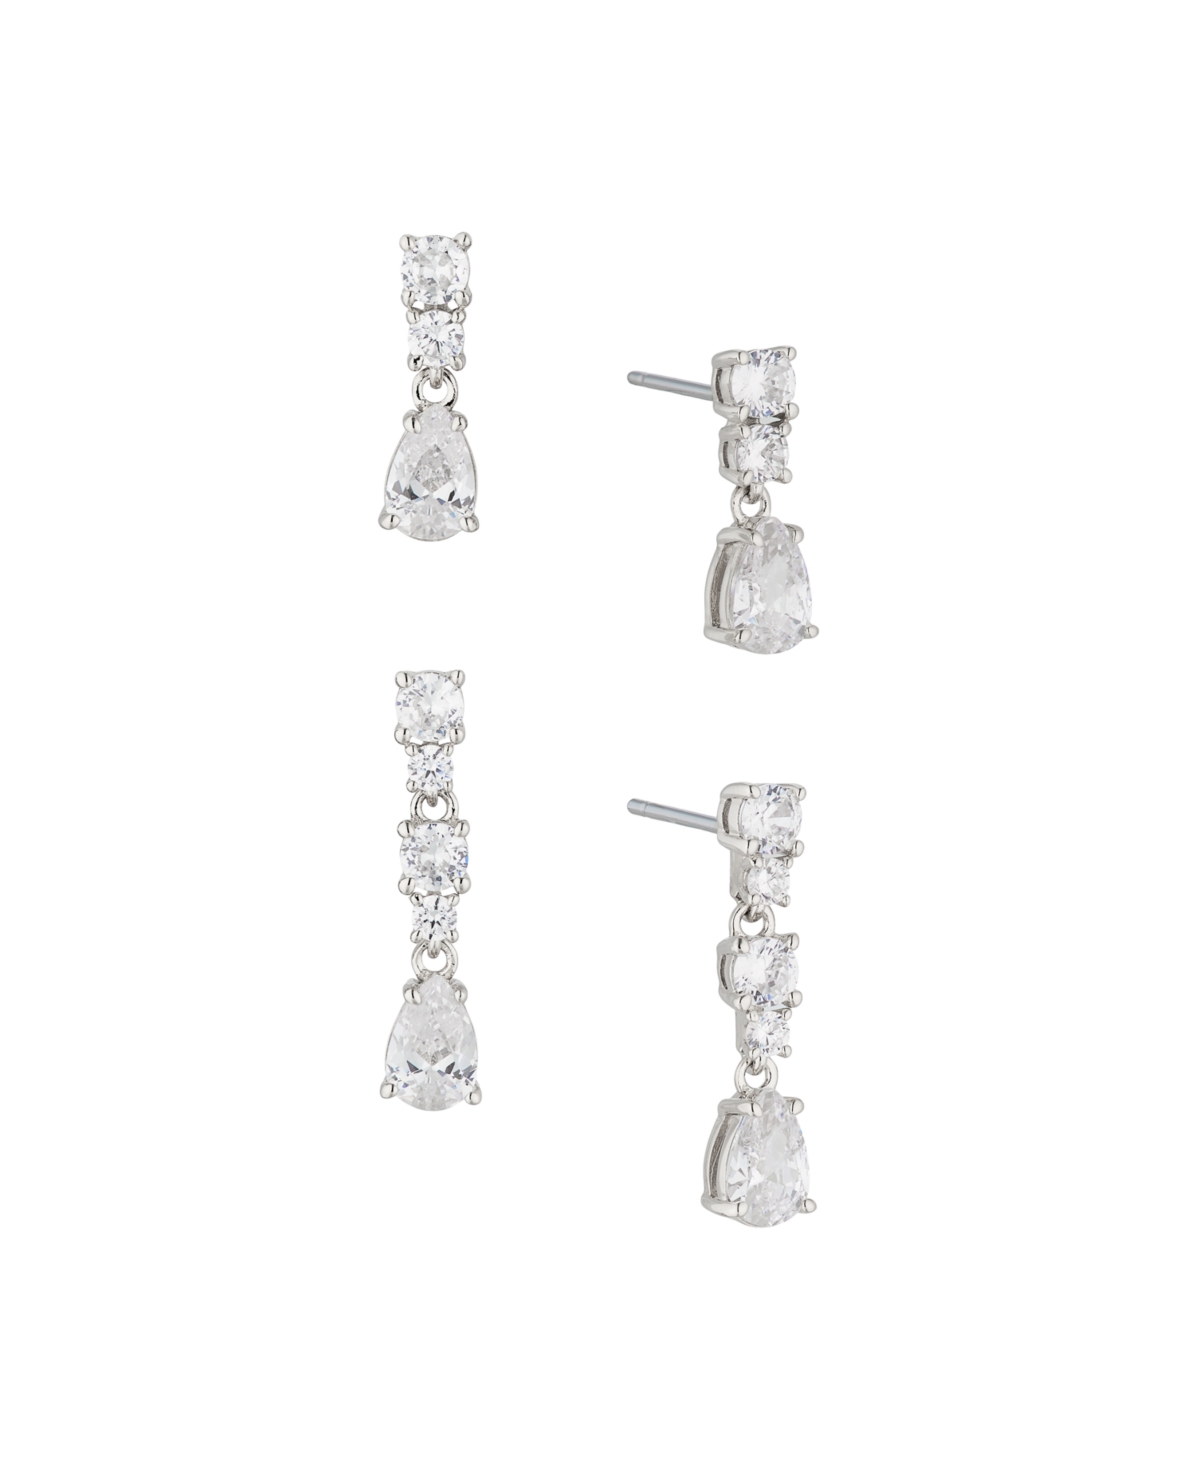 Eliot Danori Cubic Zirconia Linear And Drop Set Two Pair Of Earrings (4 Pieces) In Silver